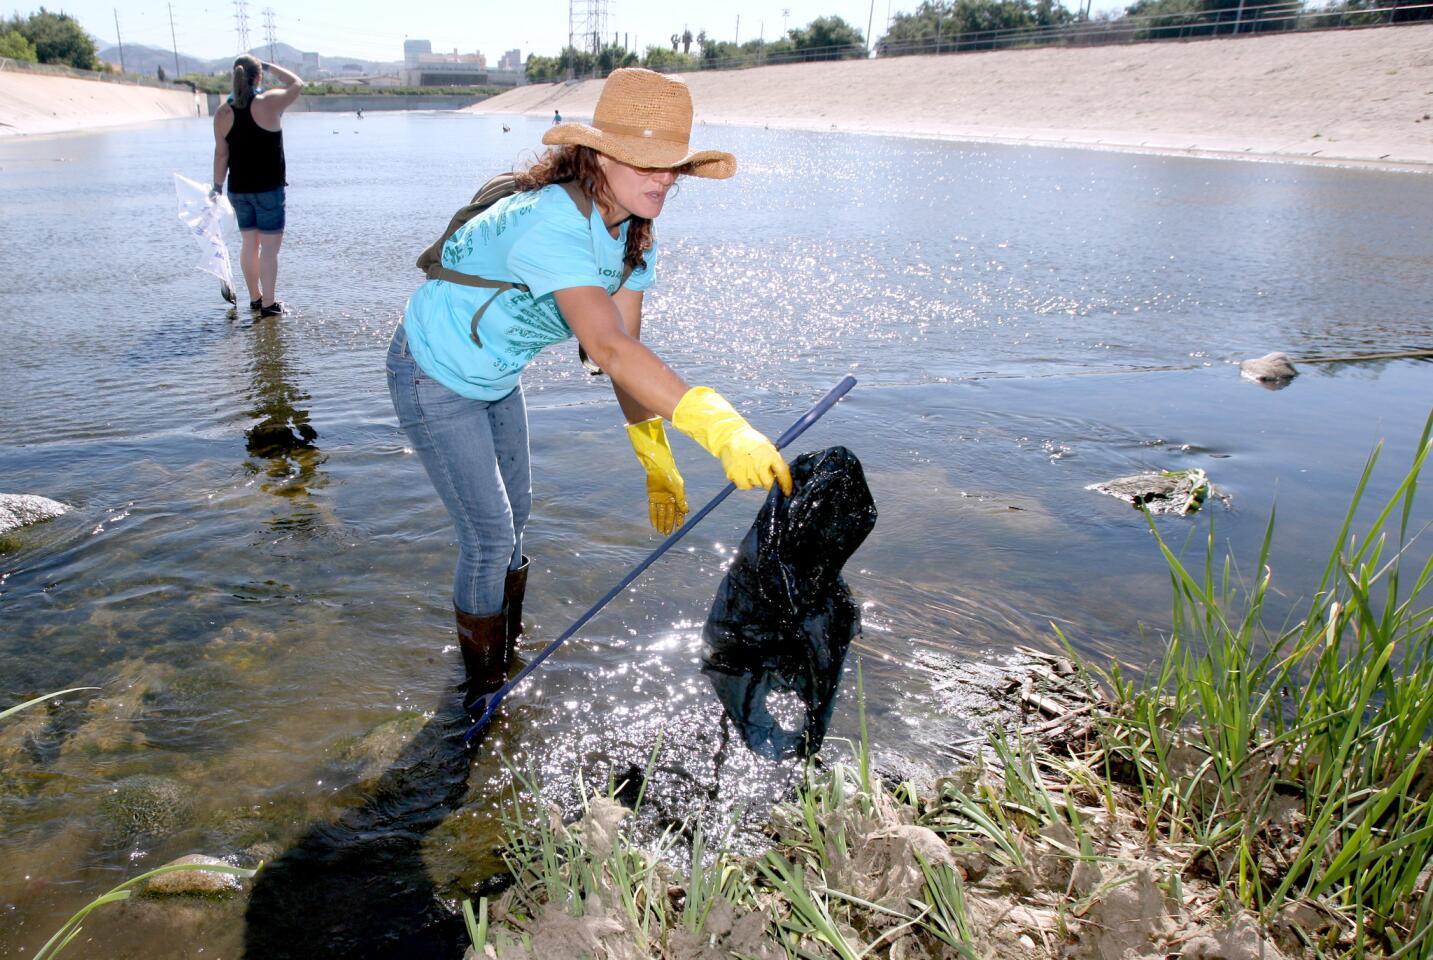 Gesa Engel, 44 of Los Angeles, removed plastic and other trash from the Los Angeles River during clean-up event sponsored by the Friends of the L.A. River, at Glendale Narrows Riverwalk in Glendale, on Saturday, April 16, 2016. Hundreds of volunteers fanned out throughout a mile stretch of the river and removed tons of trash.